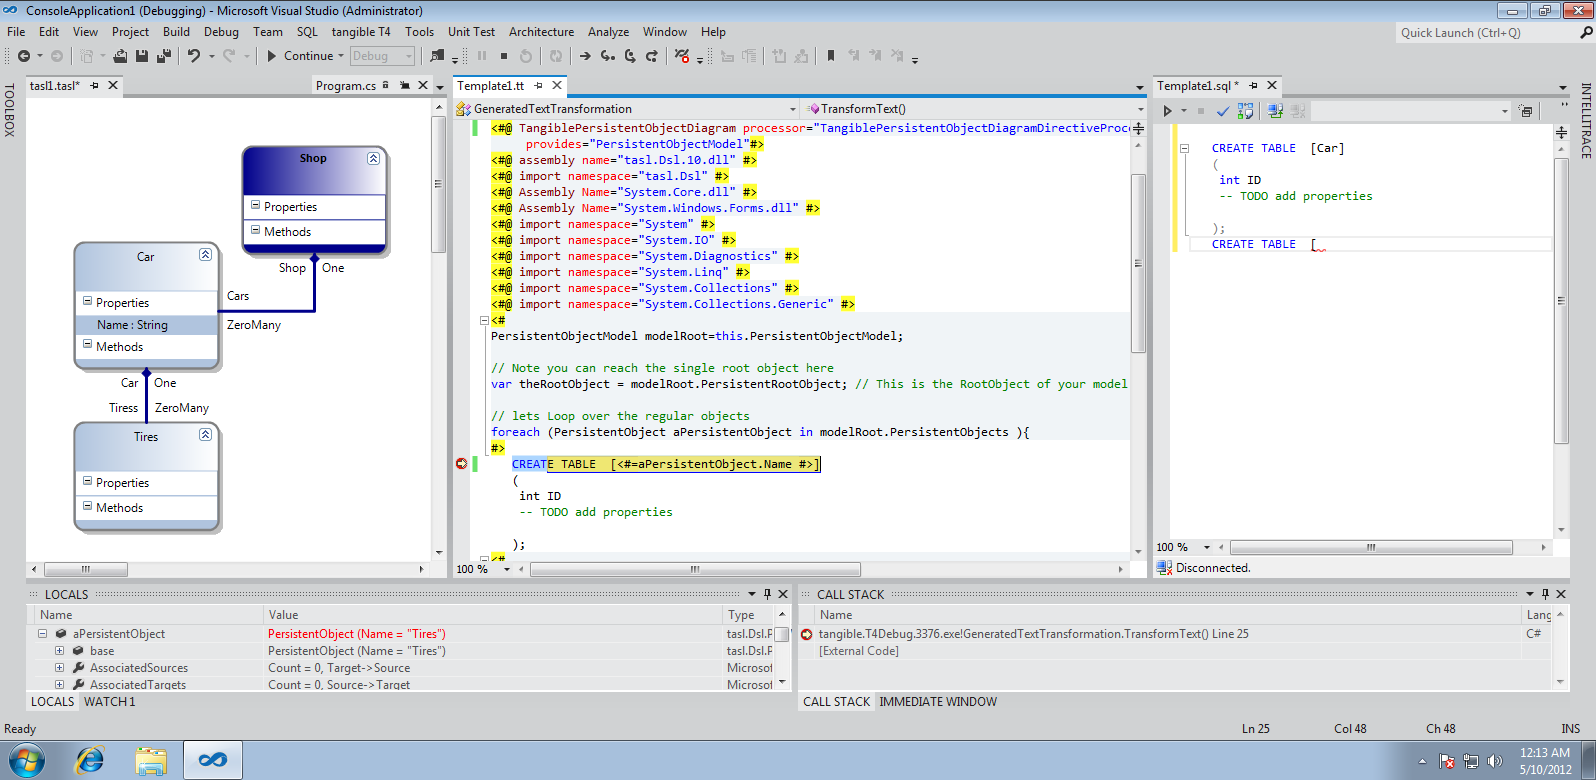 Visual studio 2010 projects with source code free download 32 bit